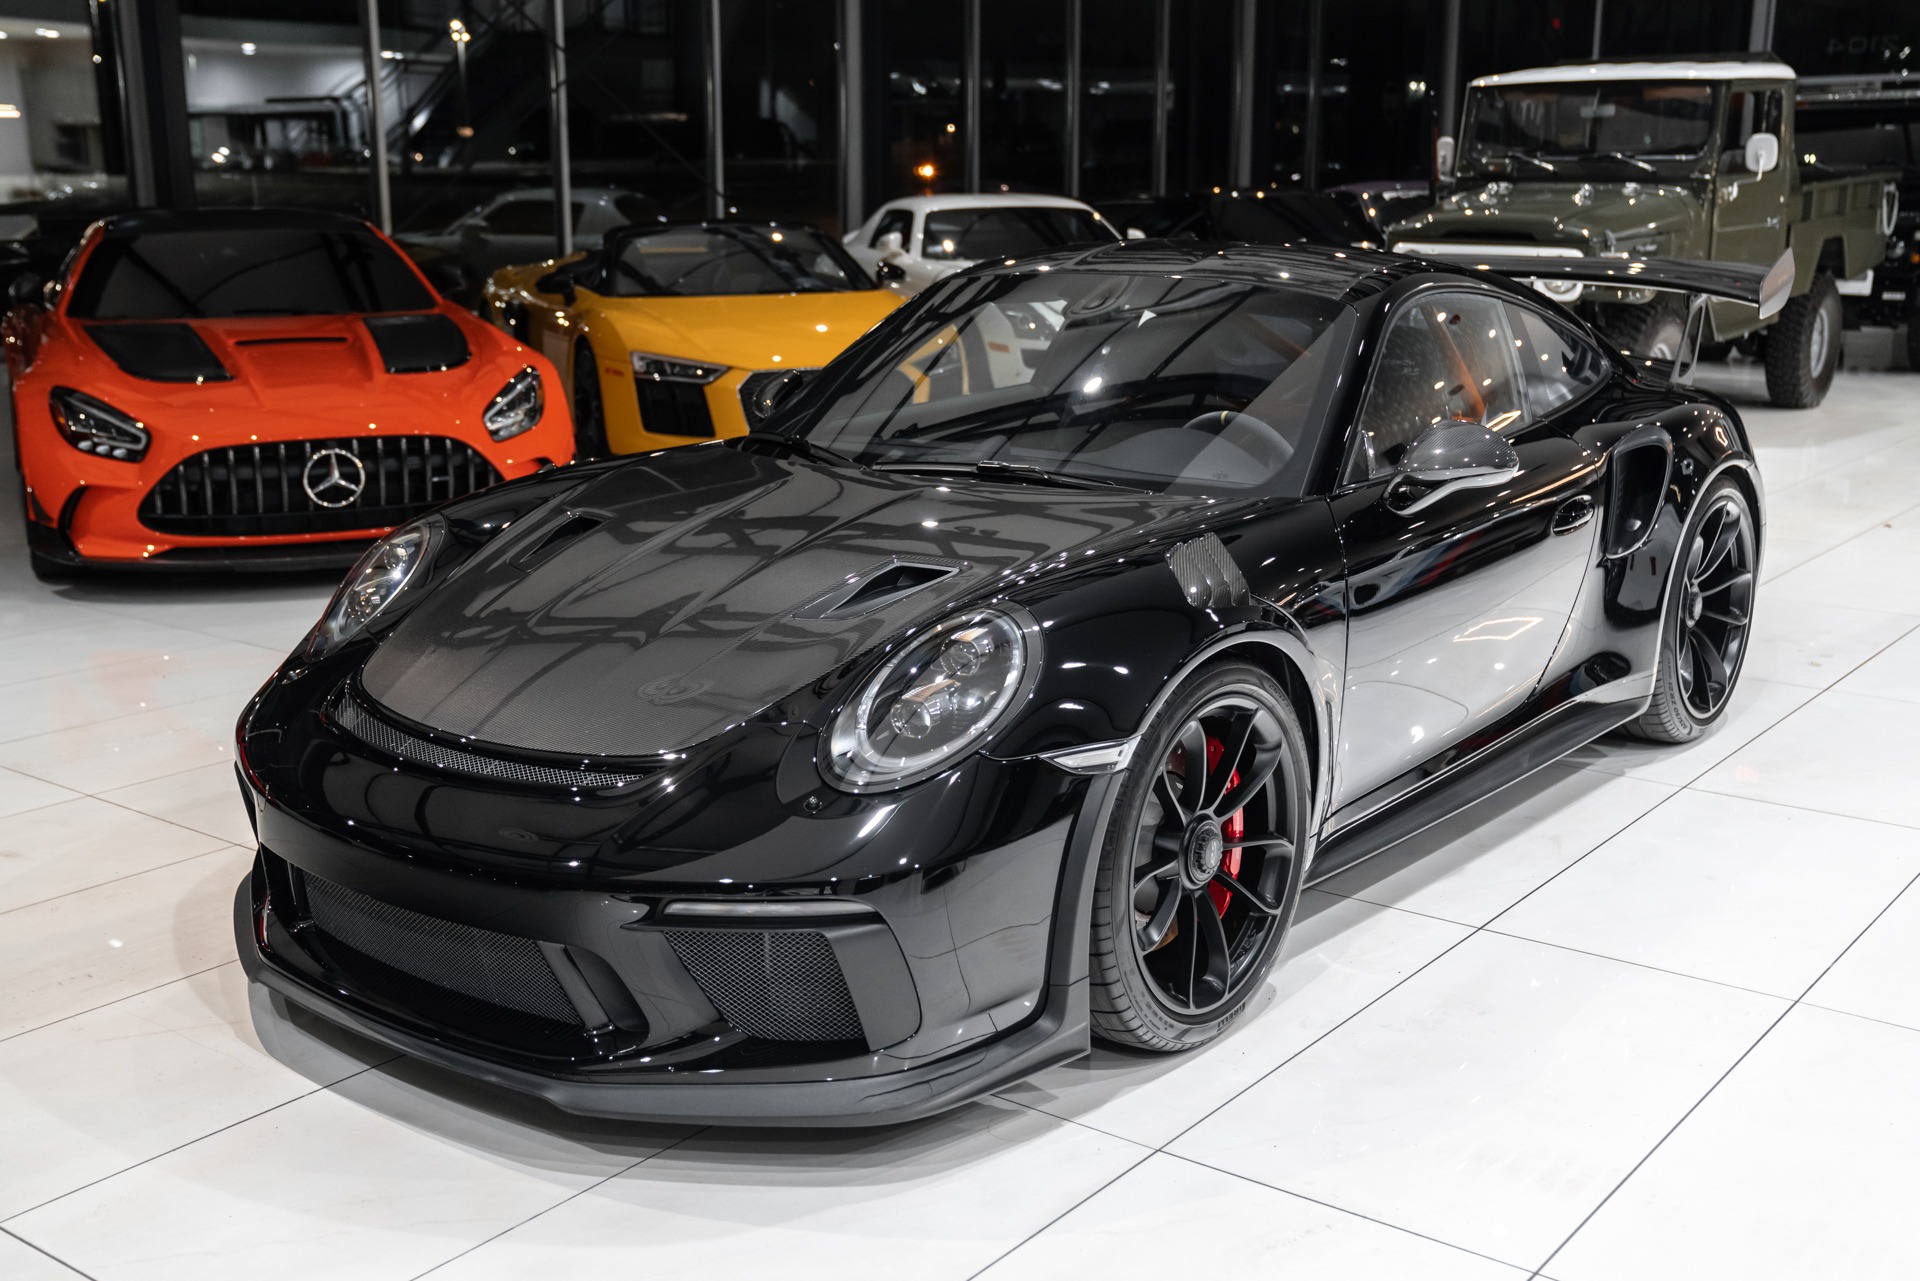 Used-2019-Porsche-911-GT3-RS-9912-Weissach-Package-Coupe-Front-Lift-TONS-of-Carbon-FULL-PPF